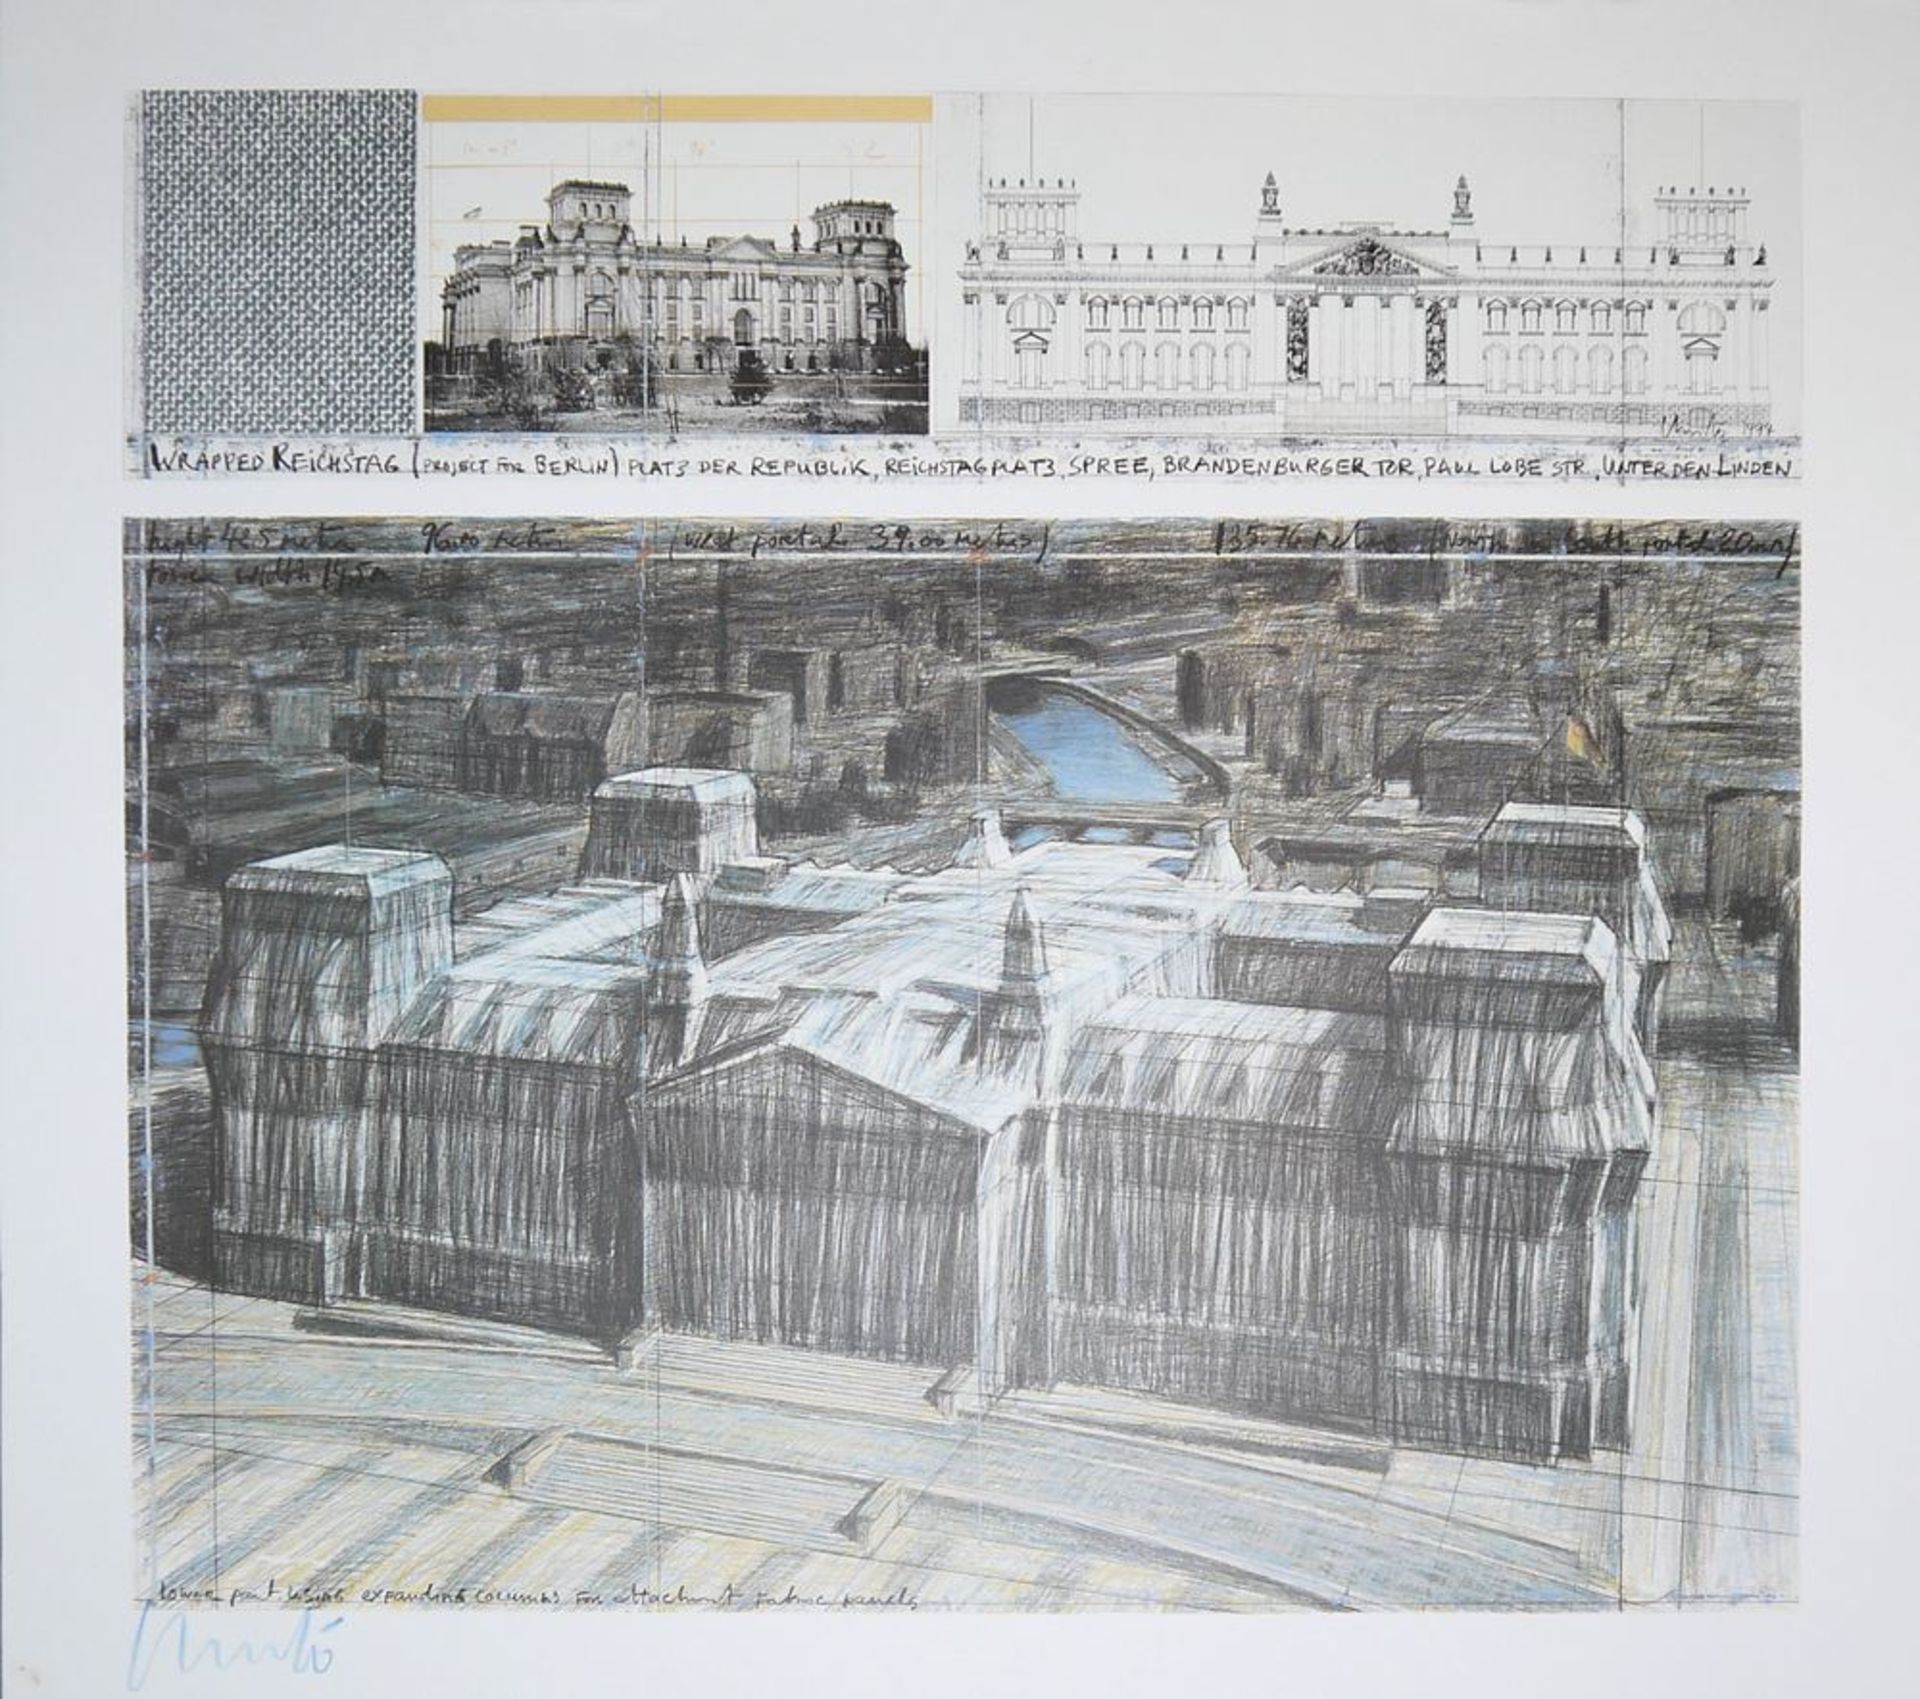 Christo & Jeanne-Claude, "Wrapped Reichstag", signed colour offset print, 1995